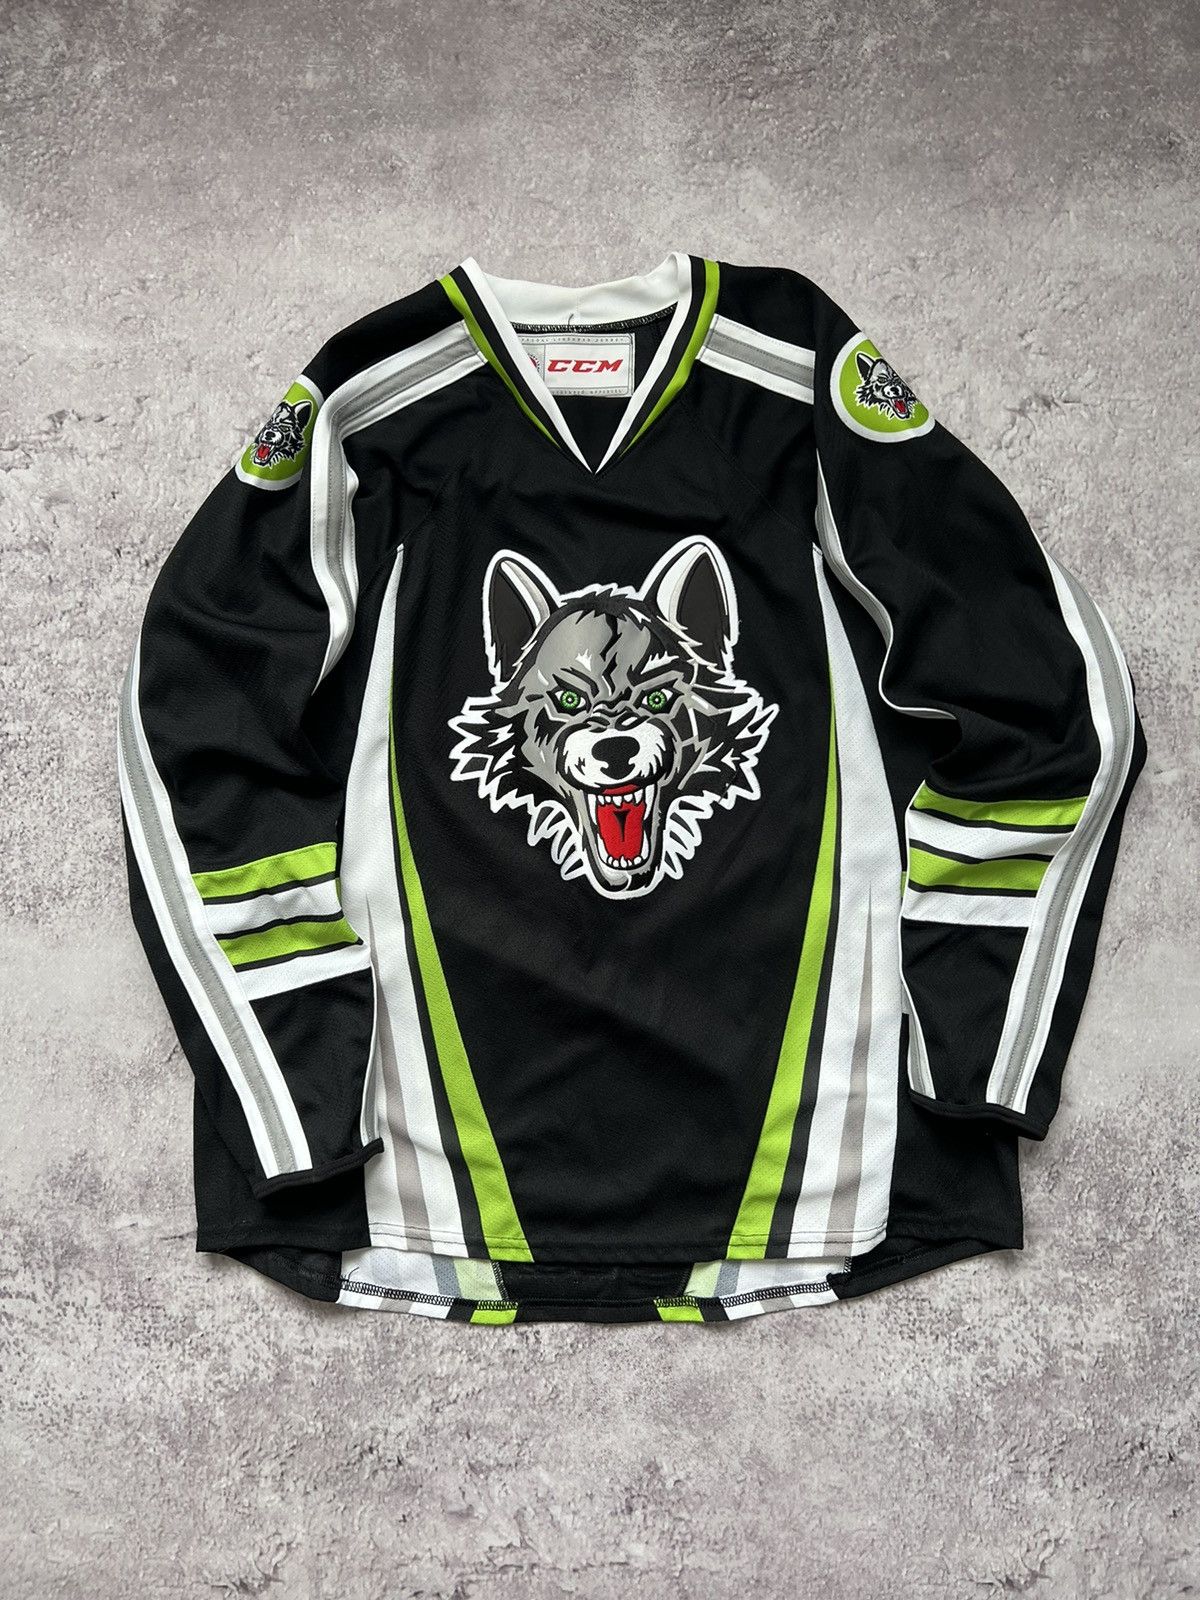 Shirts, Vintage Chicago Wolves Hockey Jersey